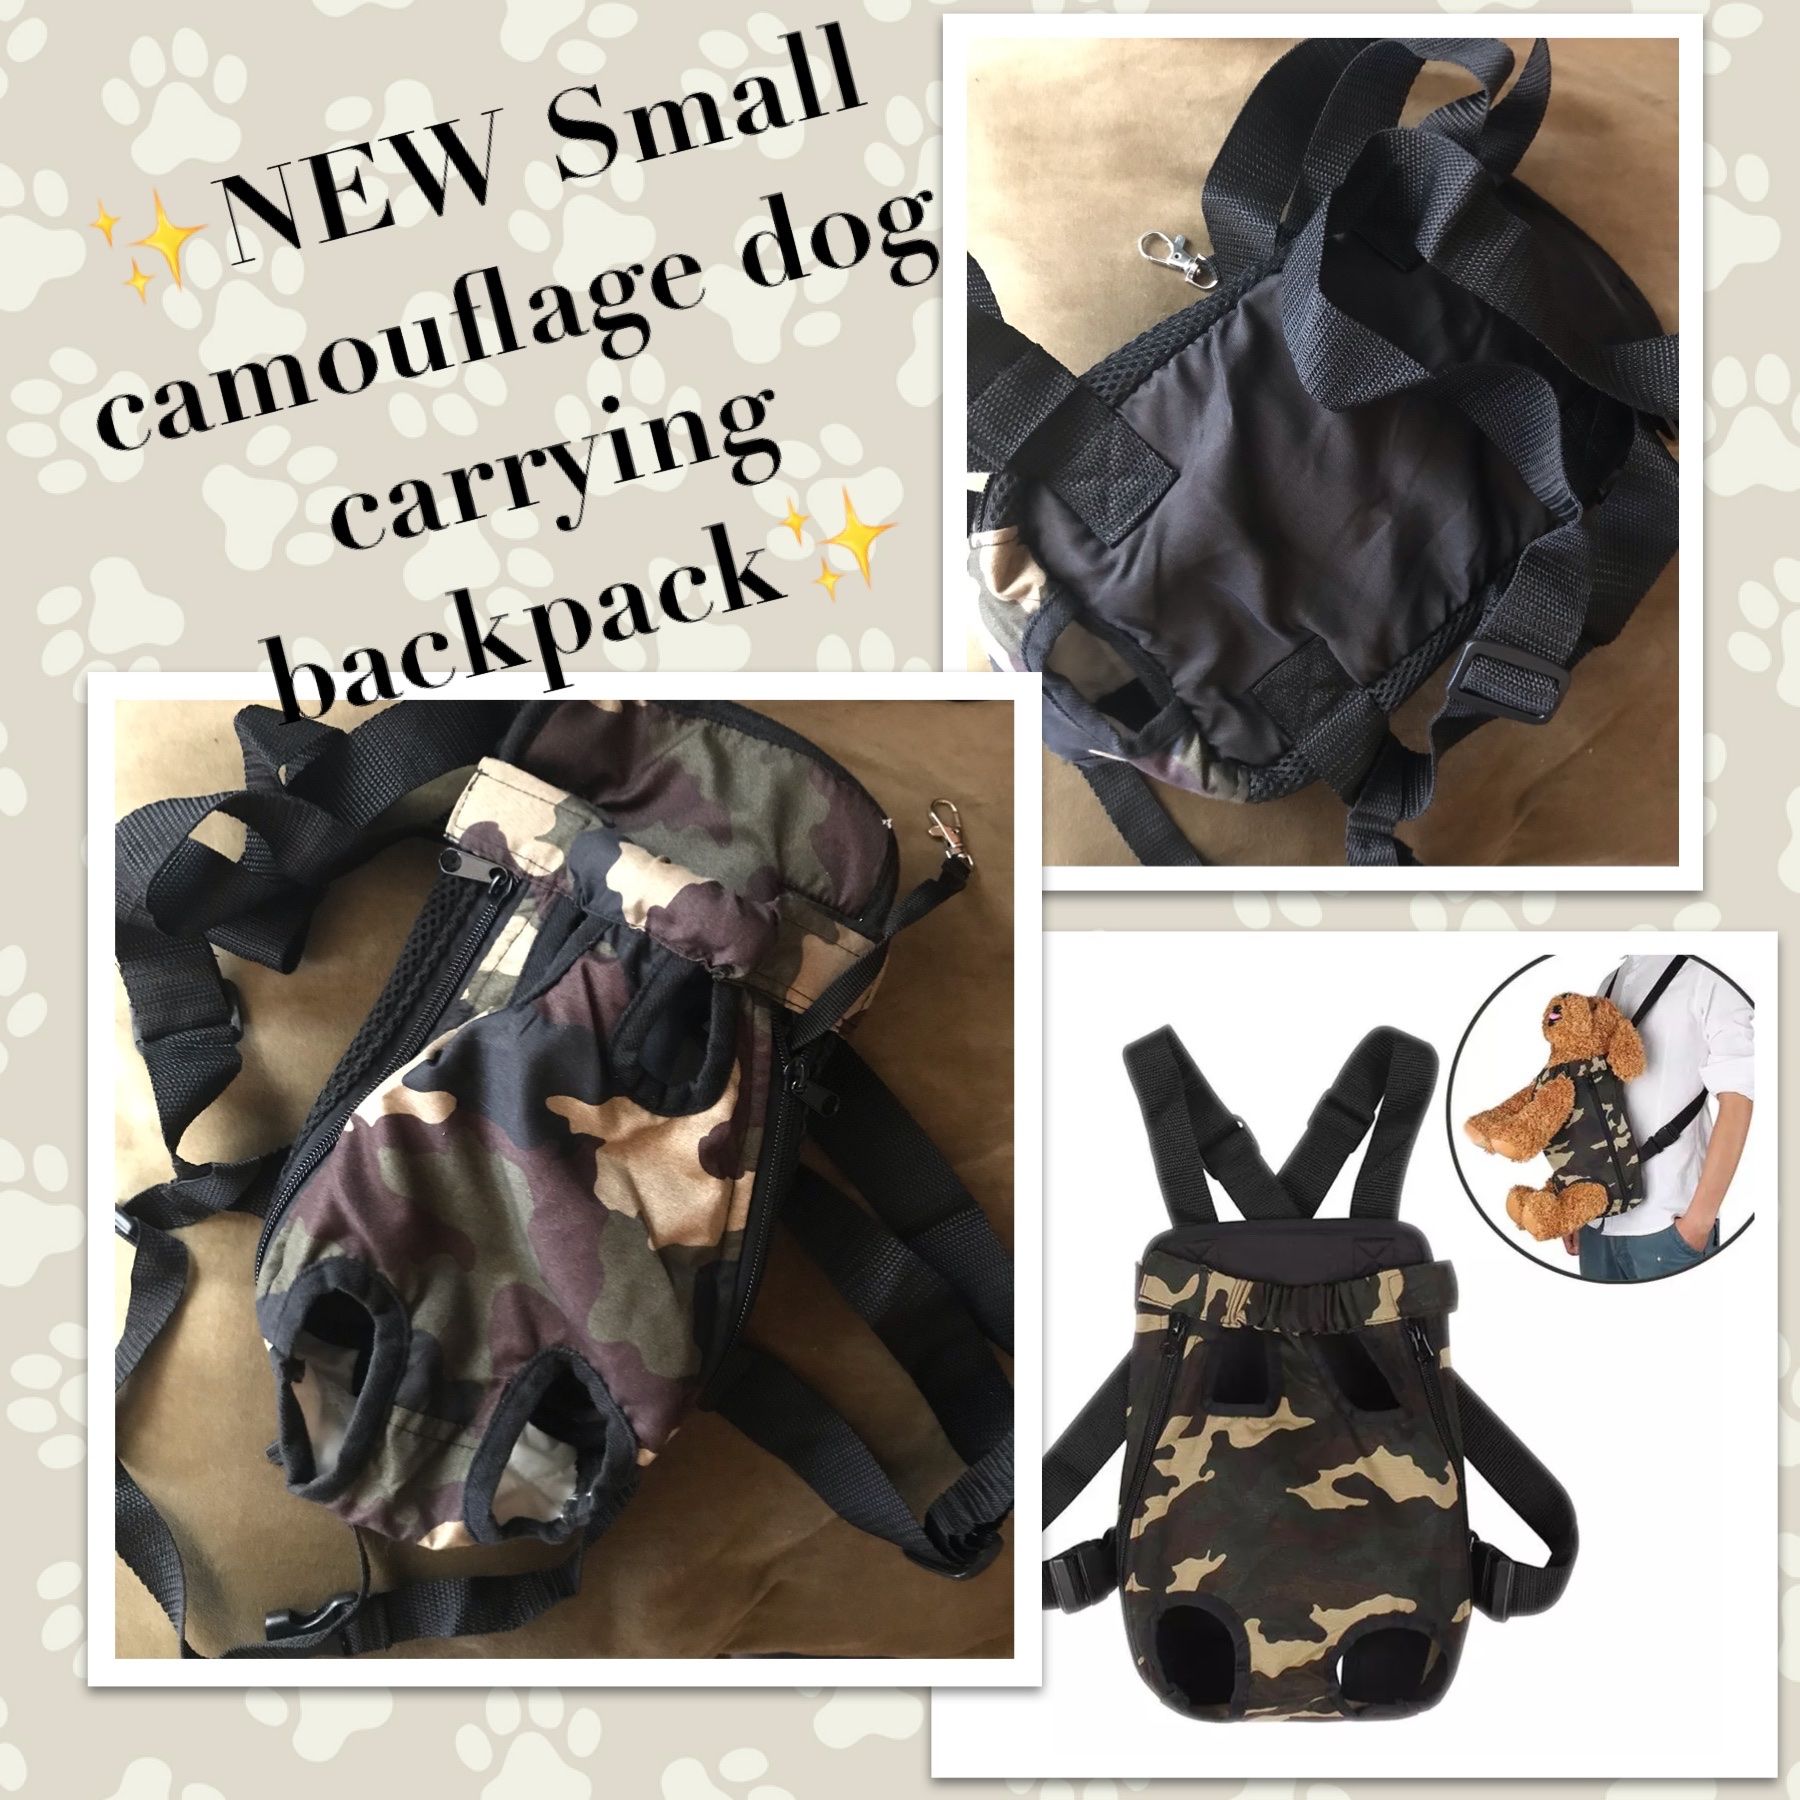 🐾 New Small Dog Camouflage Carrying Backpack🐾